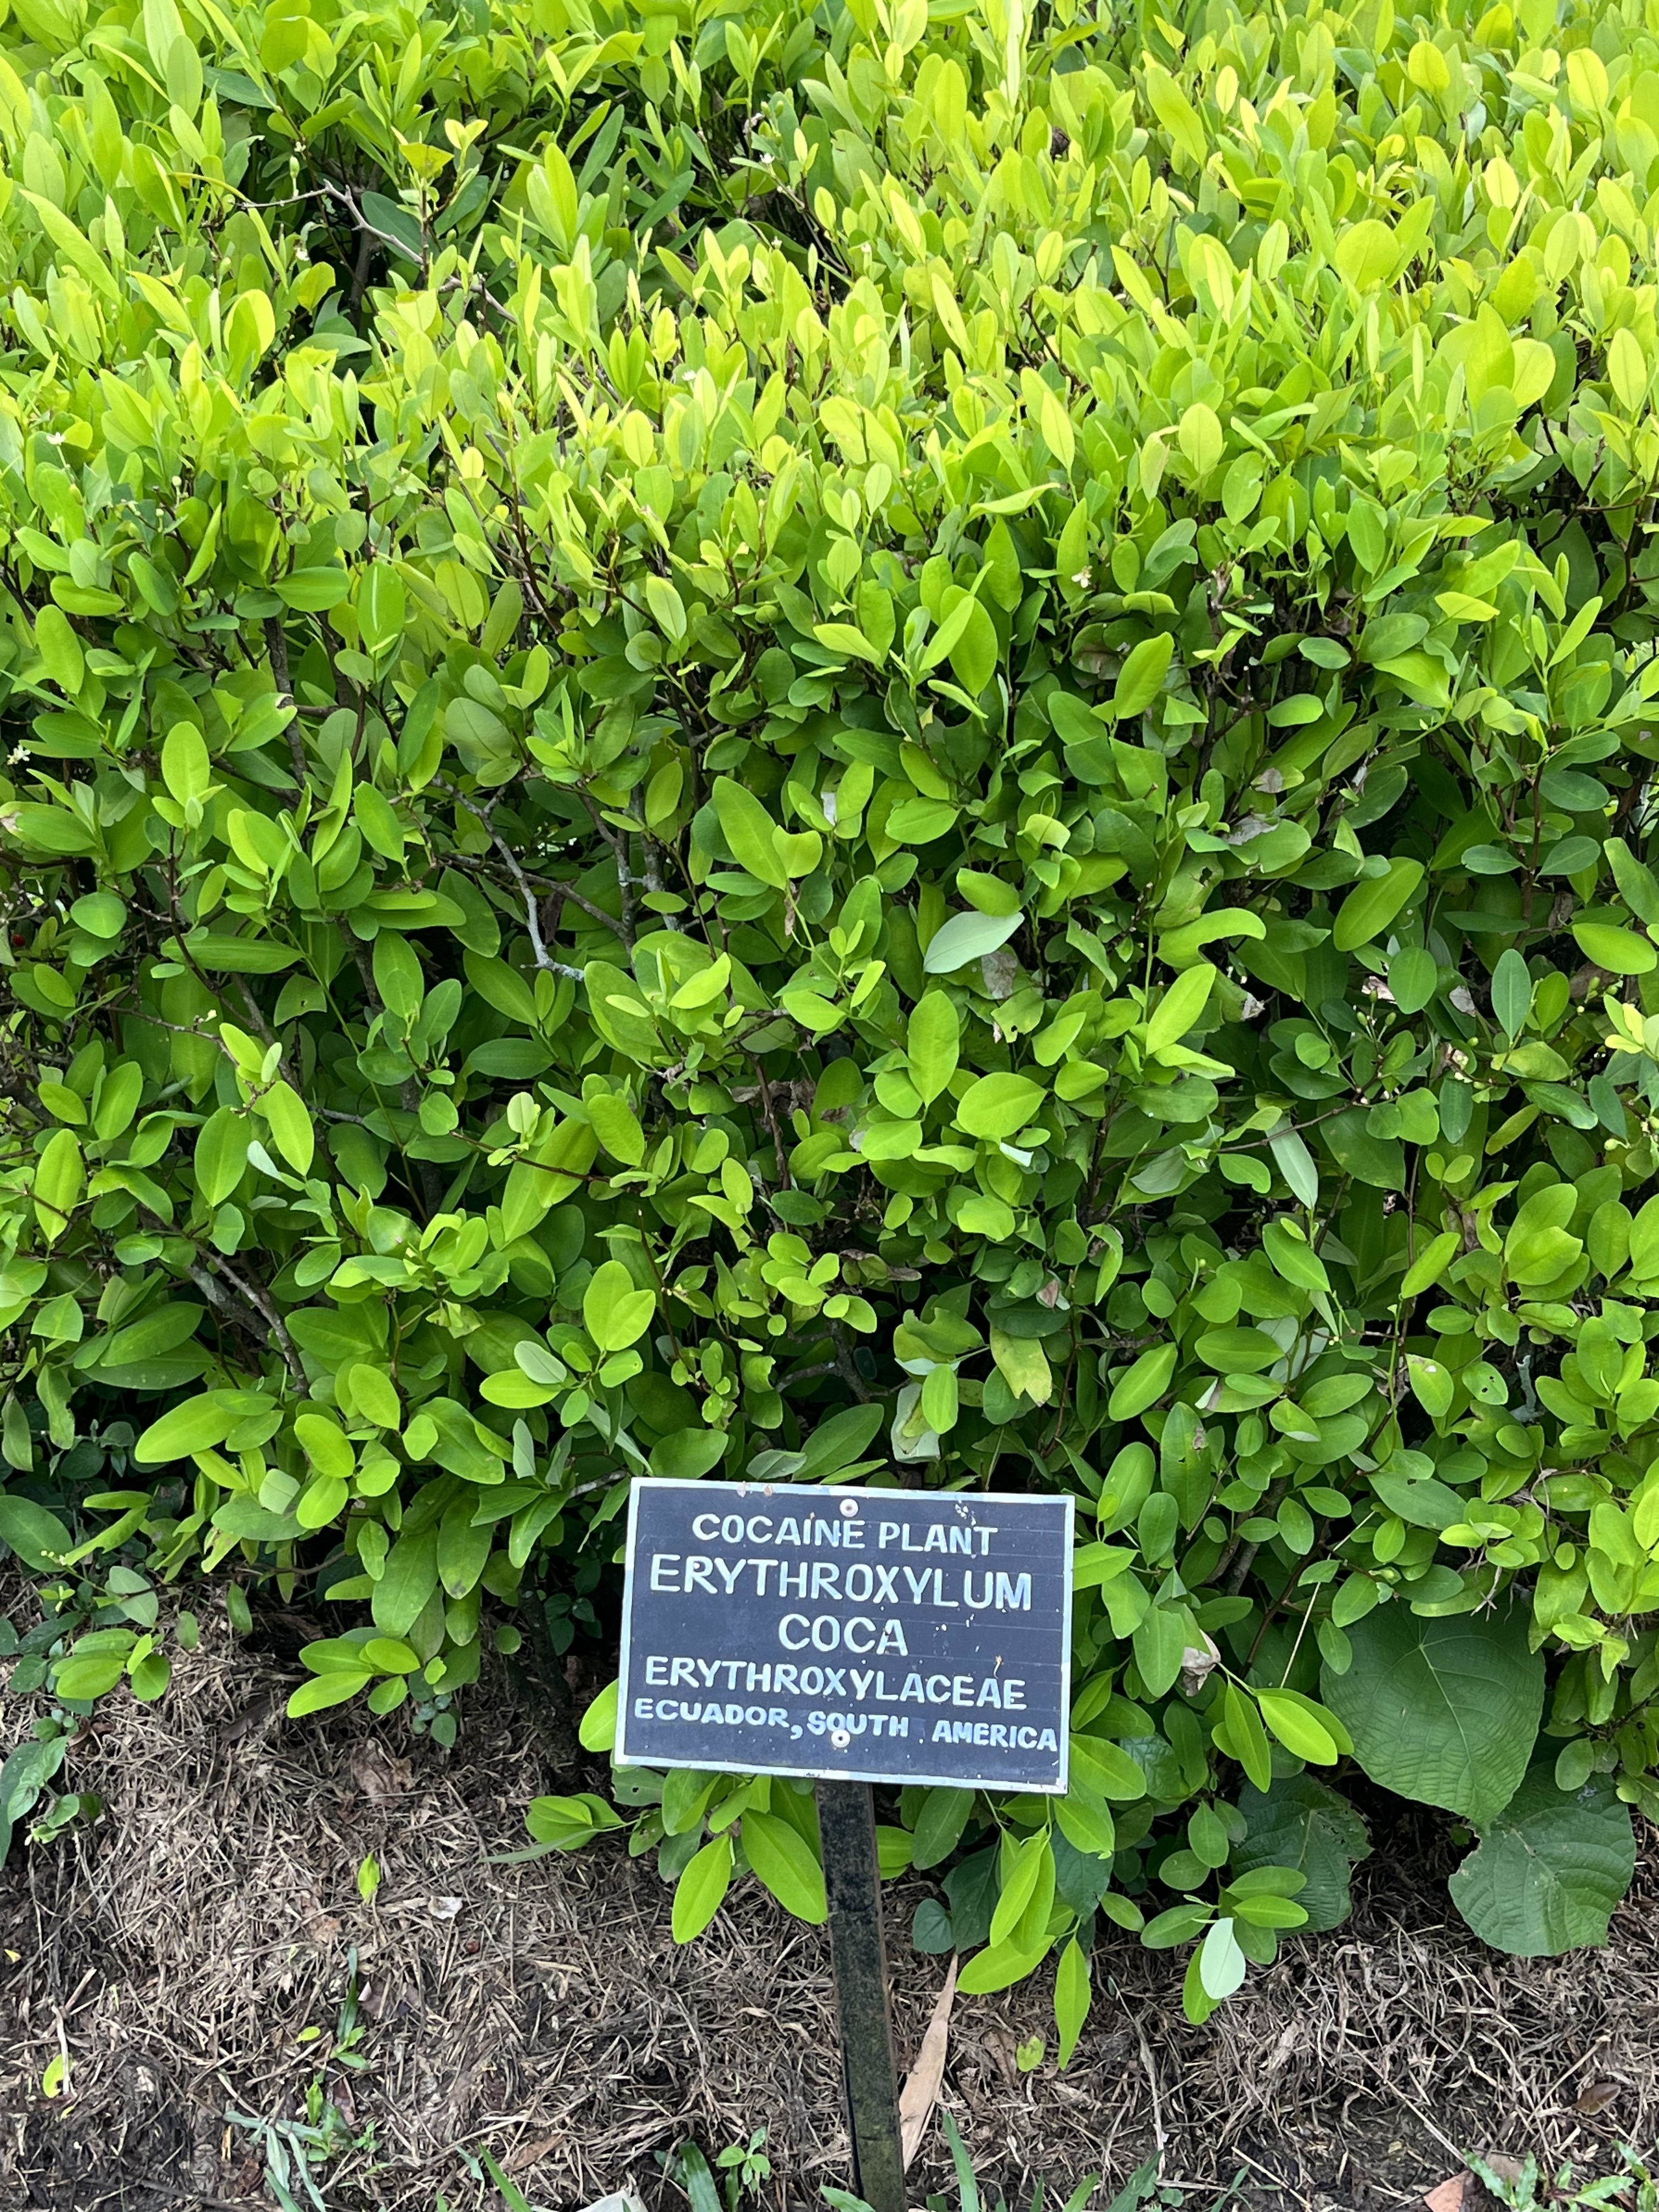 Green shrubbery with the label &quot;Cocaine plant / Erythroxylum coca / Erythroxylaceae / Ecuador, South America&quot;